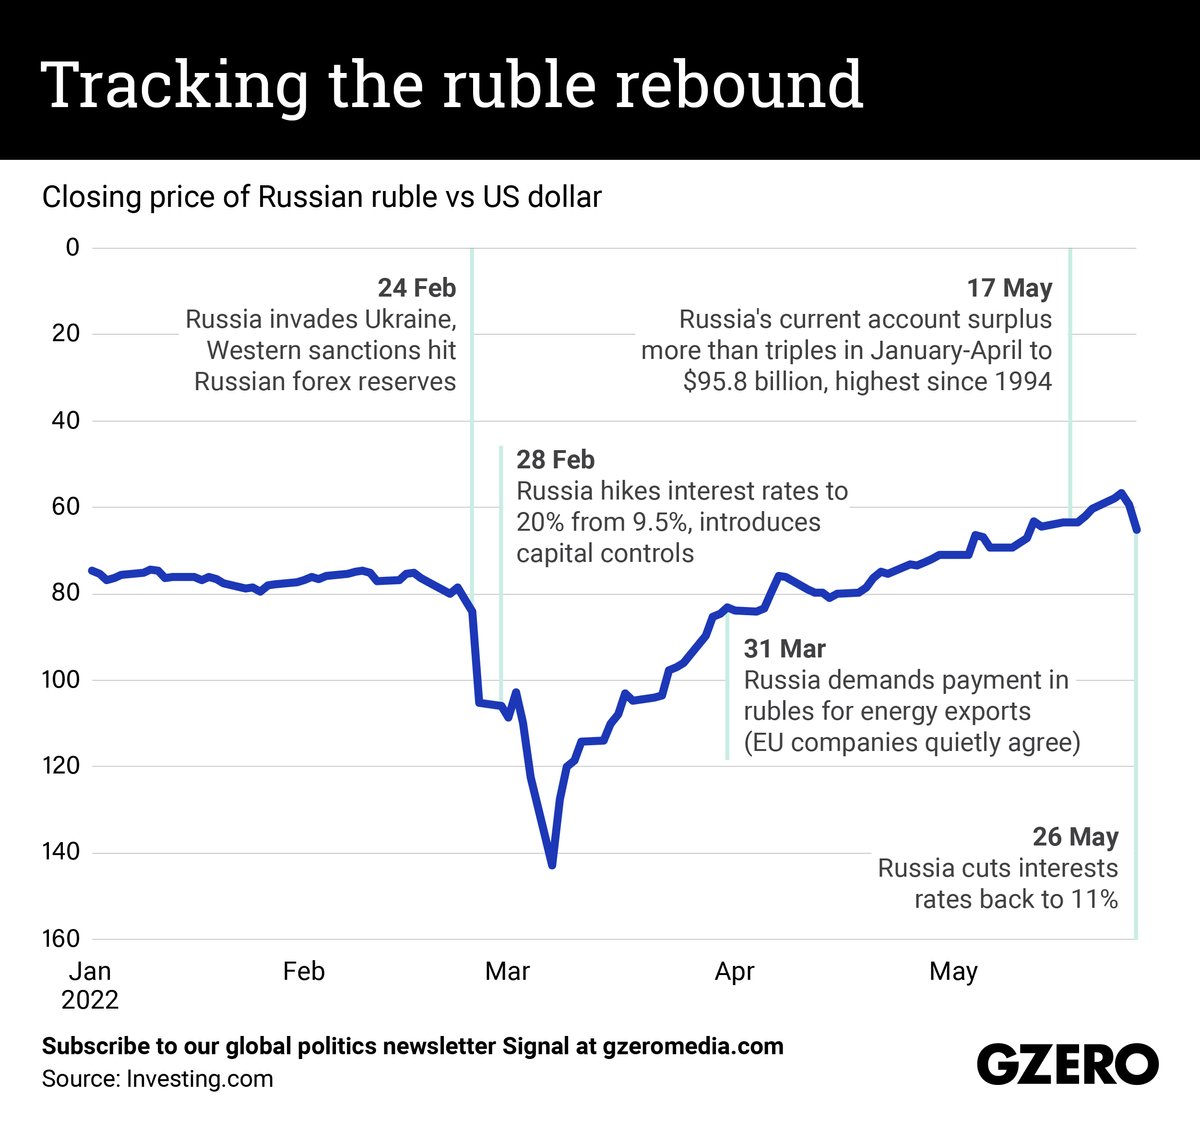 The Graphic Truth: Tracking the ruble rebound